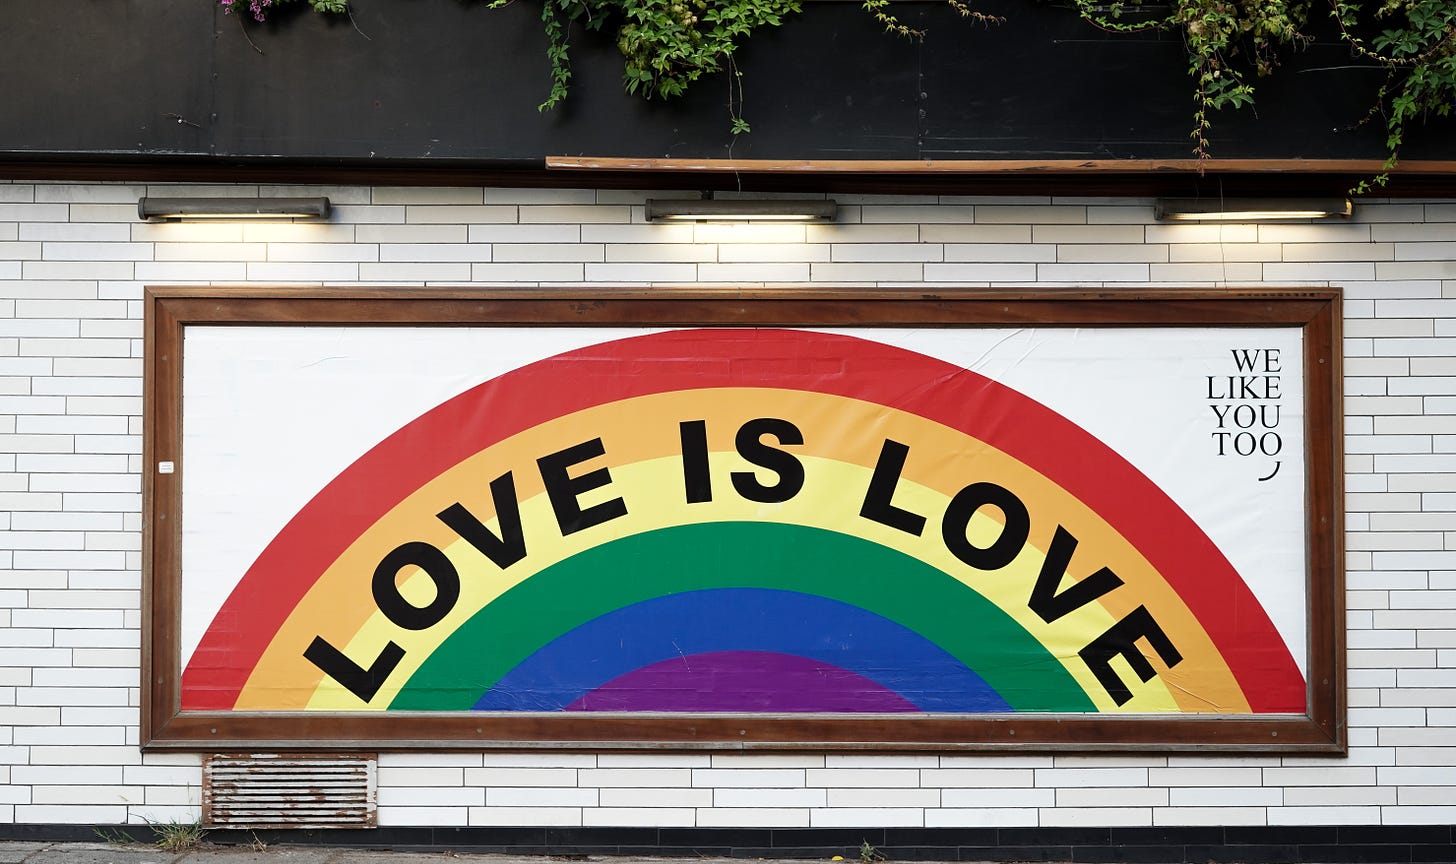 Rainbow "LOVE IS LOVE" billboard framed in wood and mounted against a white subway-tiled wall.